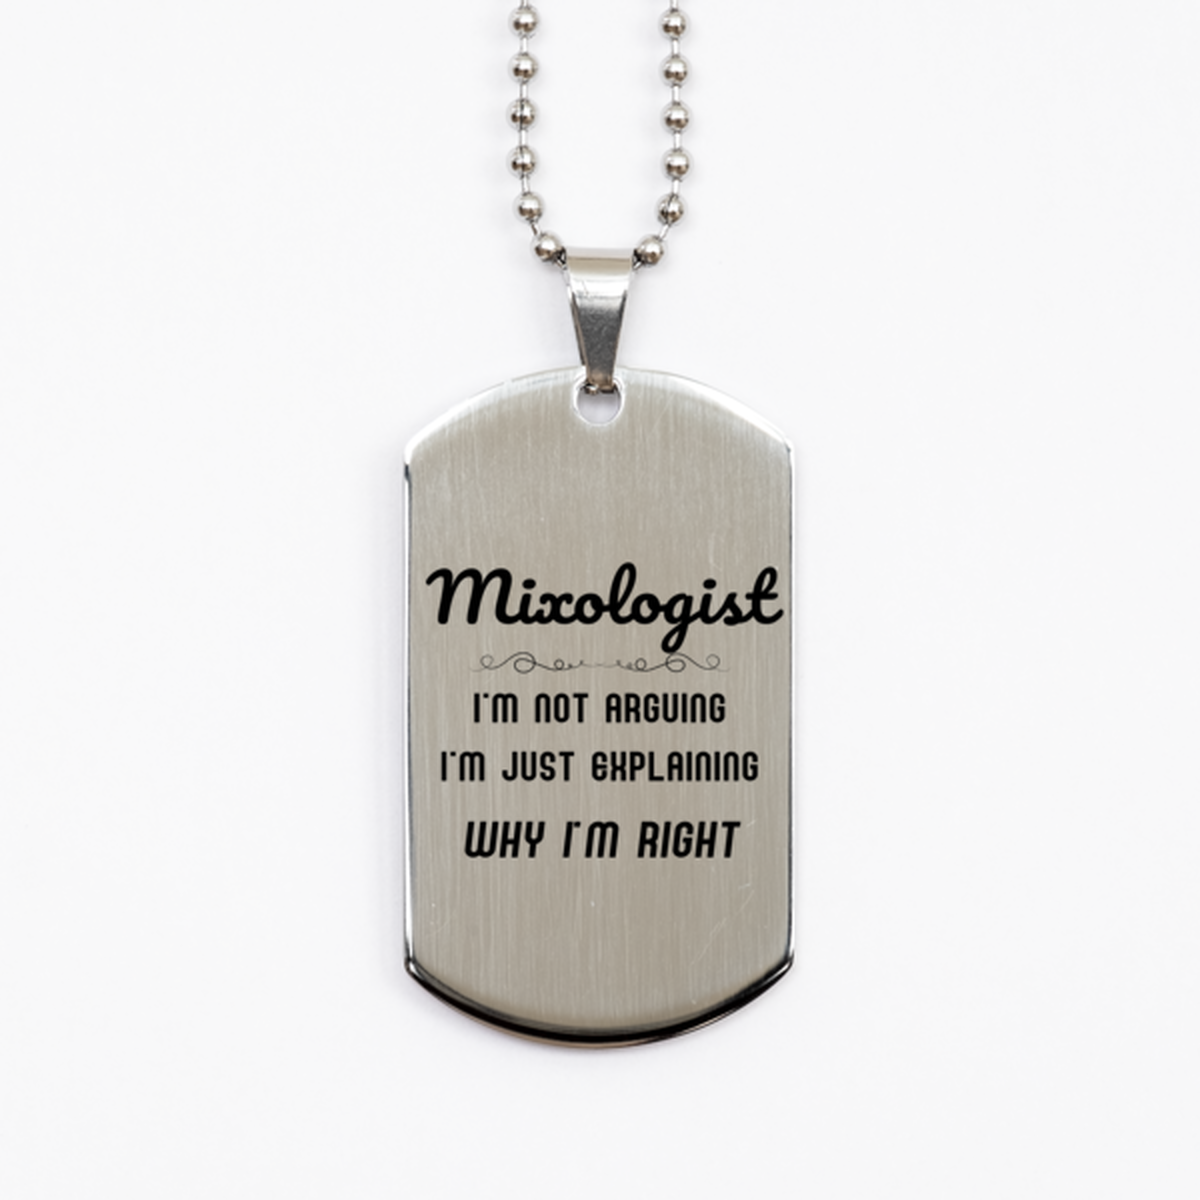 Mixologist I'm not Arguing. I'm Just Explaining Why I'm RIGHT Silver Dog Tag, Funny Saying Quote Mixologist Gifts For Mixologist Graduation Birthday Christmas Gifts for Men Women Coworker